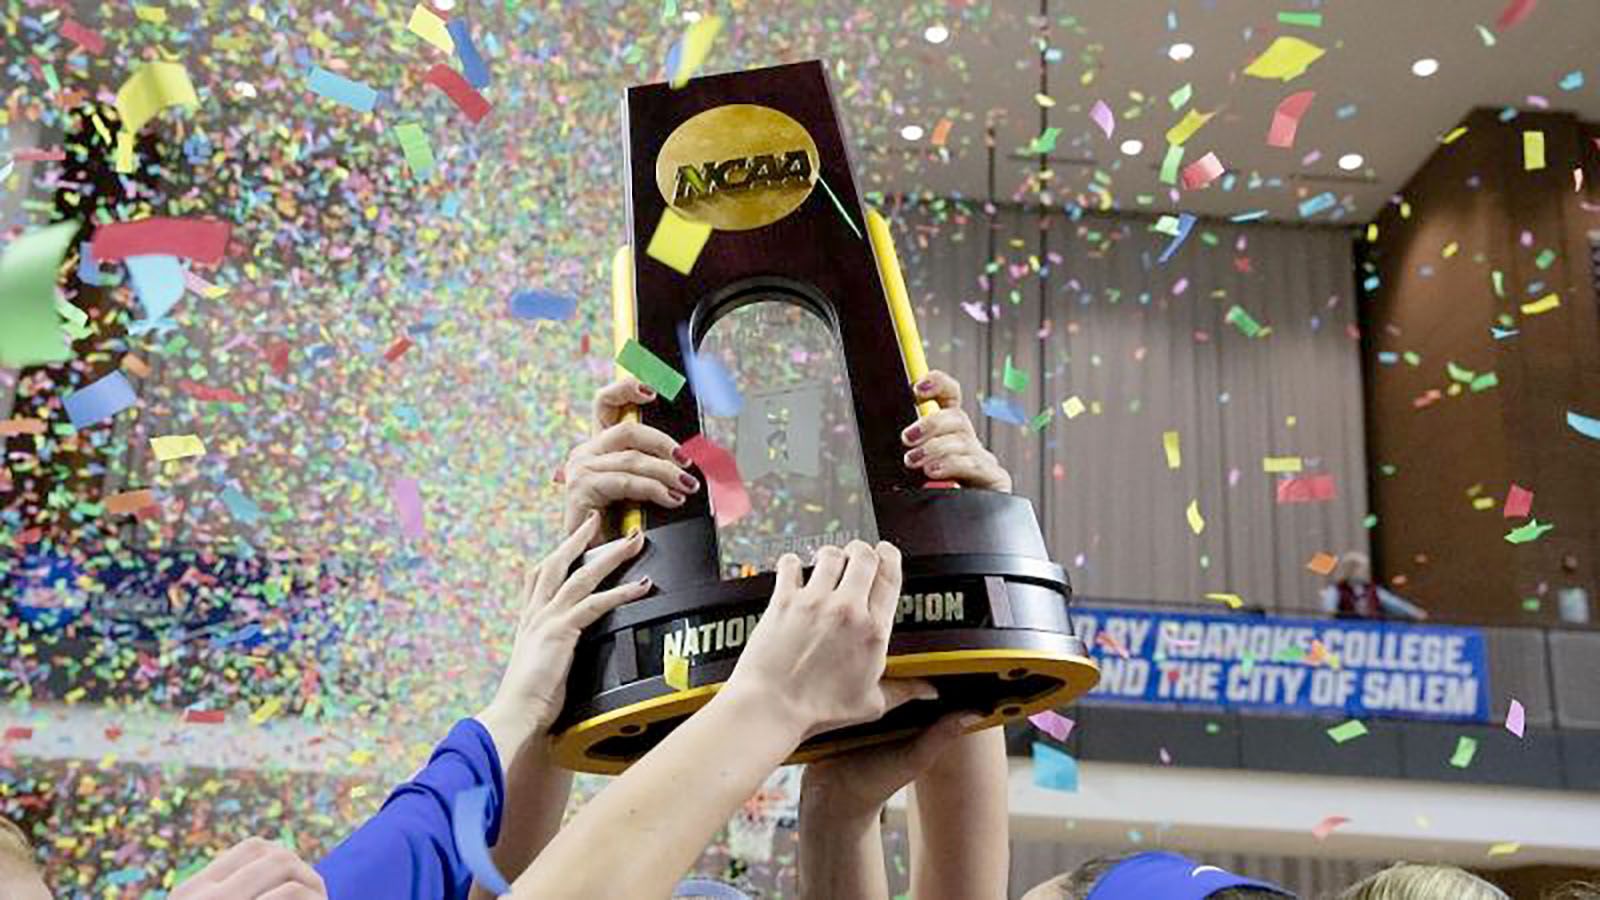 Memorial Coliseum will host the NCAA Division III Men's Basketball Championship.